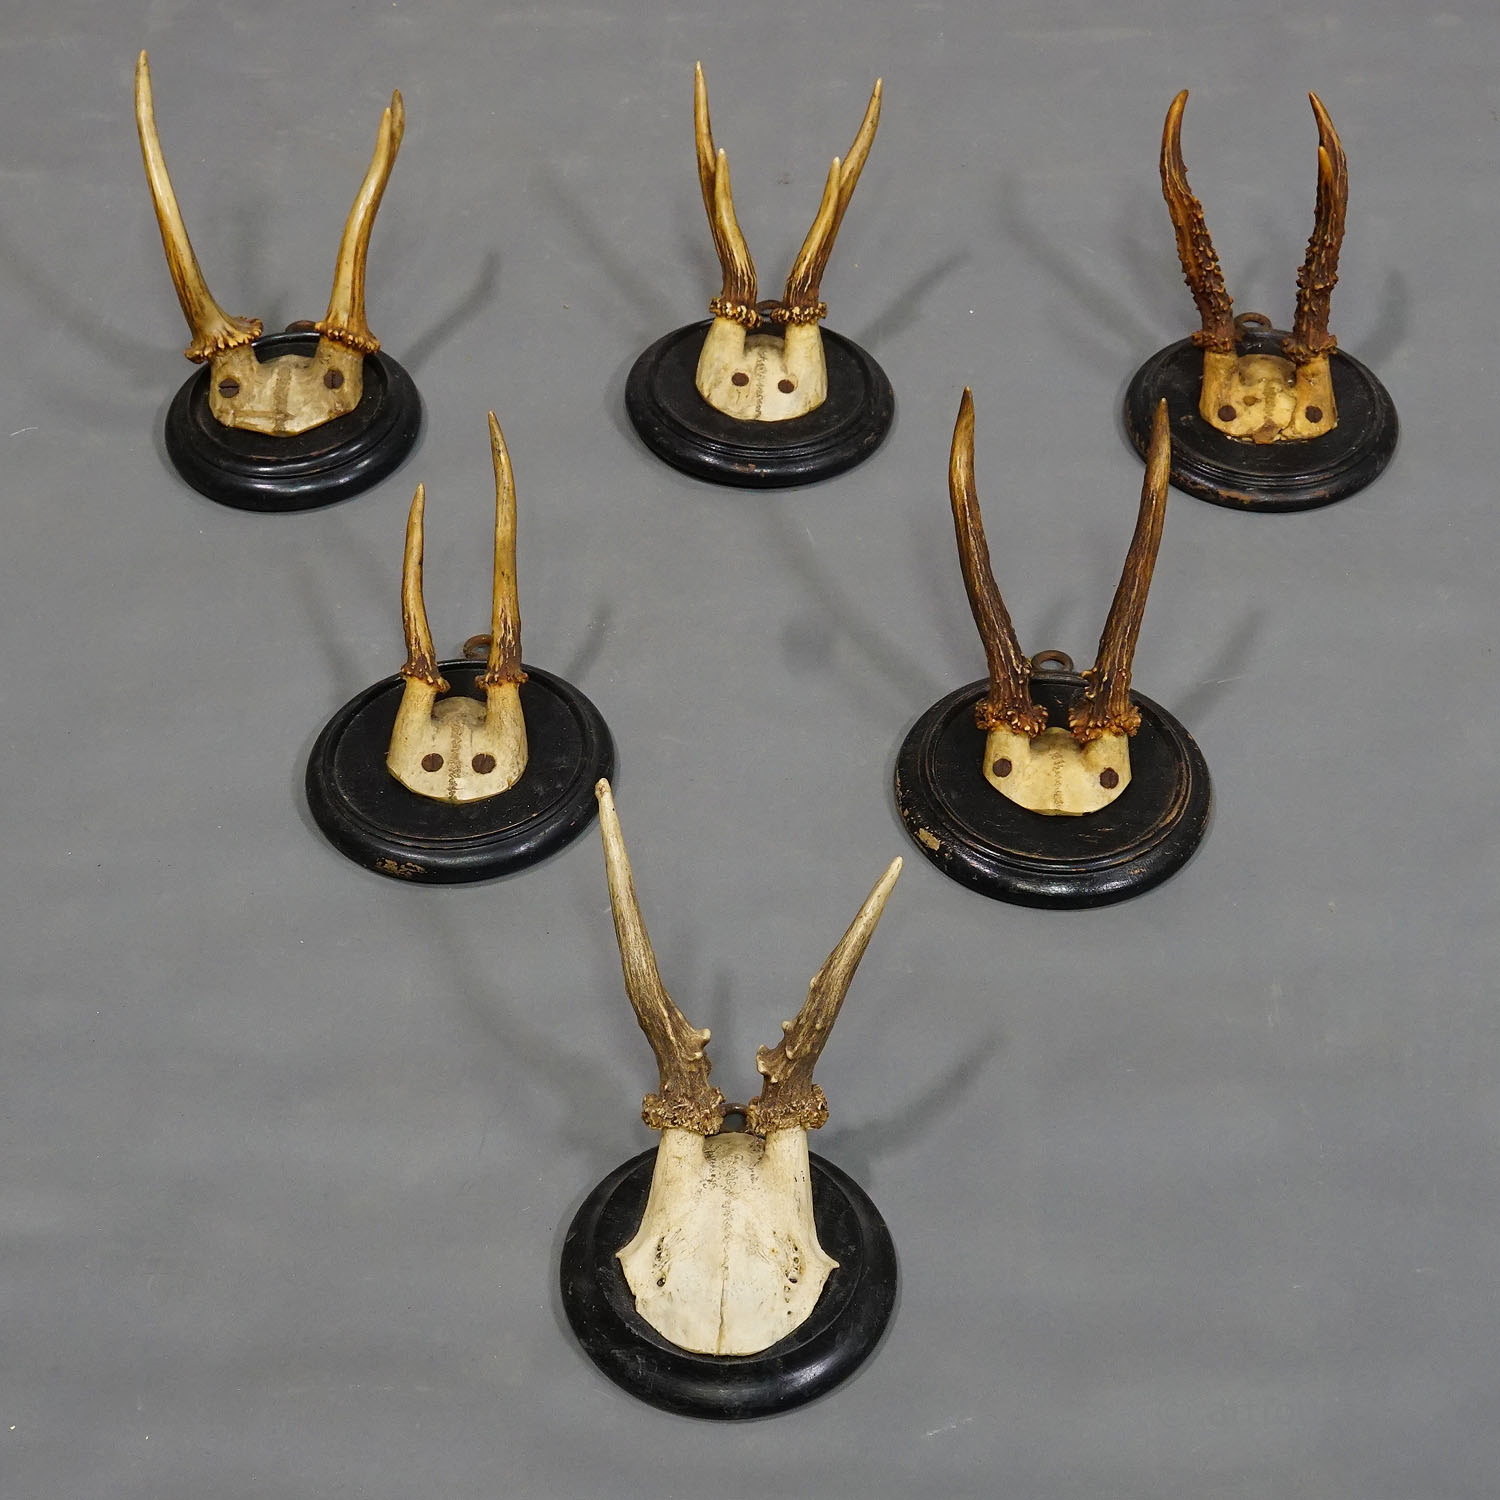 Six Antique Roe Deer Trophies on Wooden Plaques Germany ca. 1900s